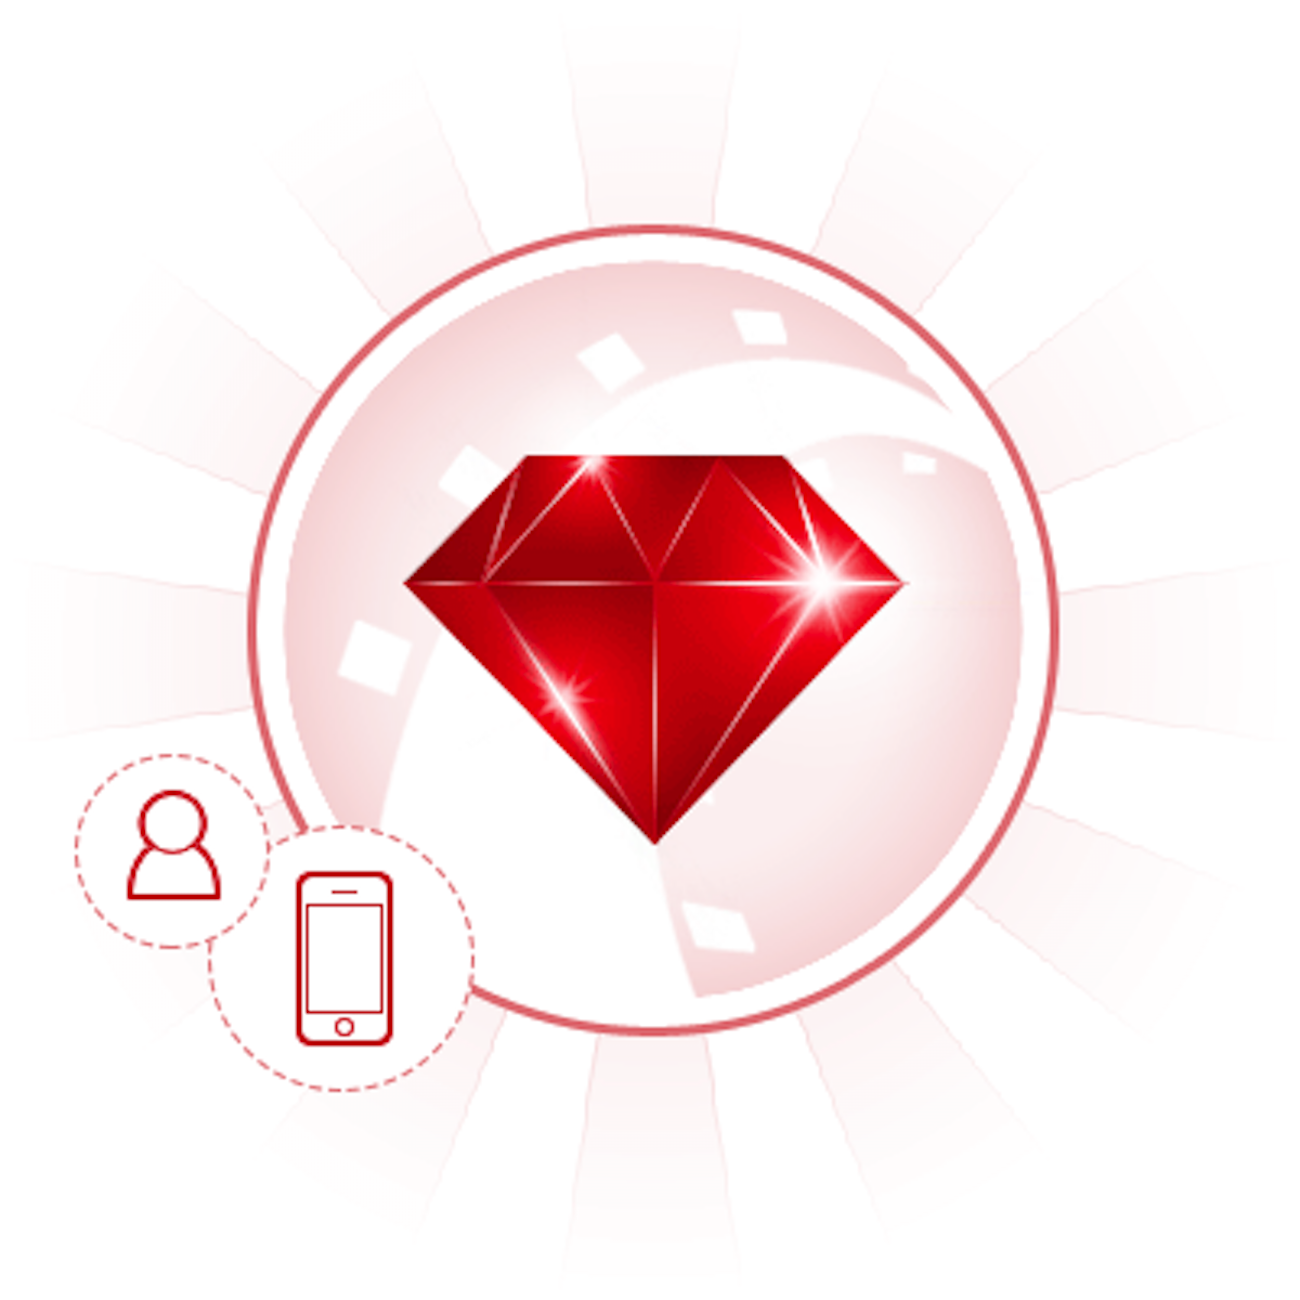 Why we use Ruby on Rails